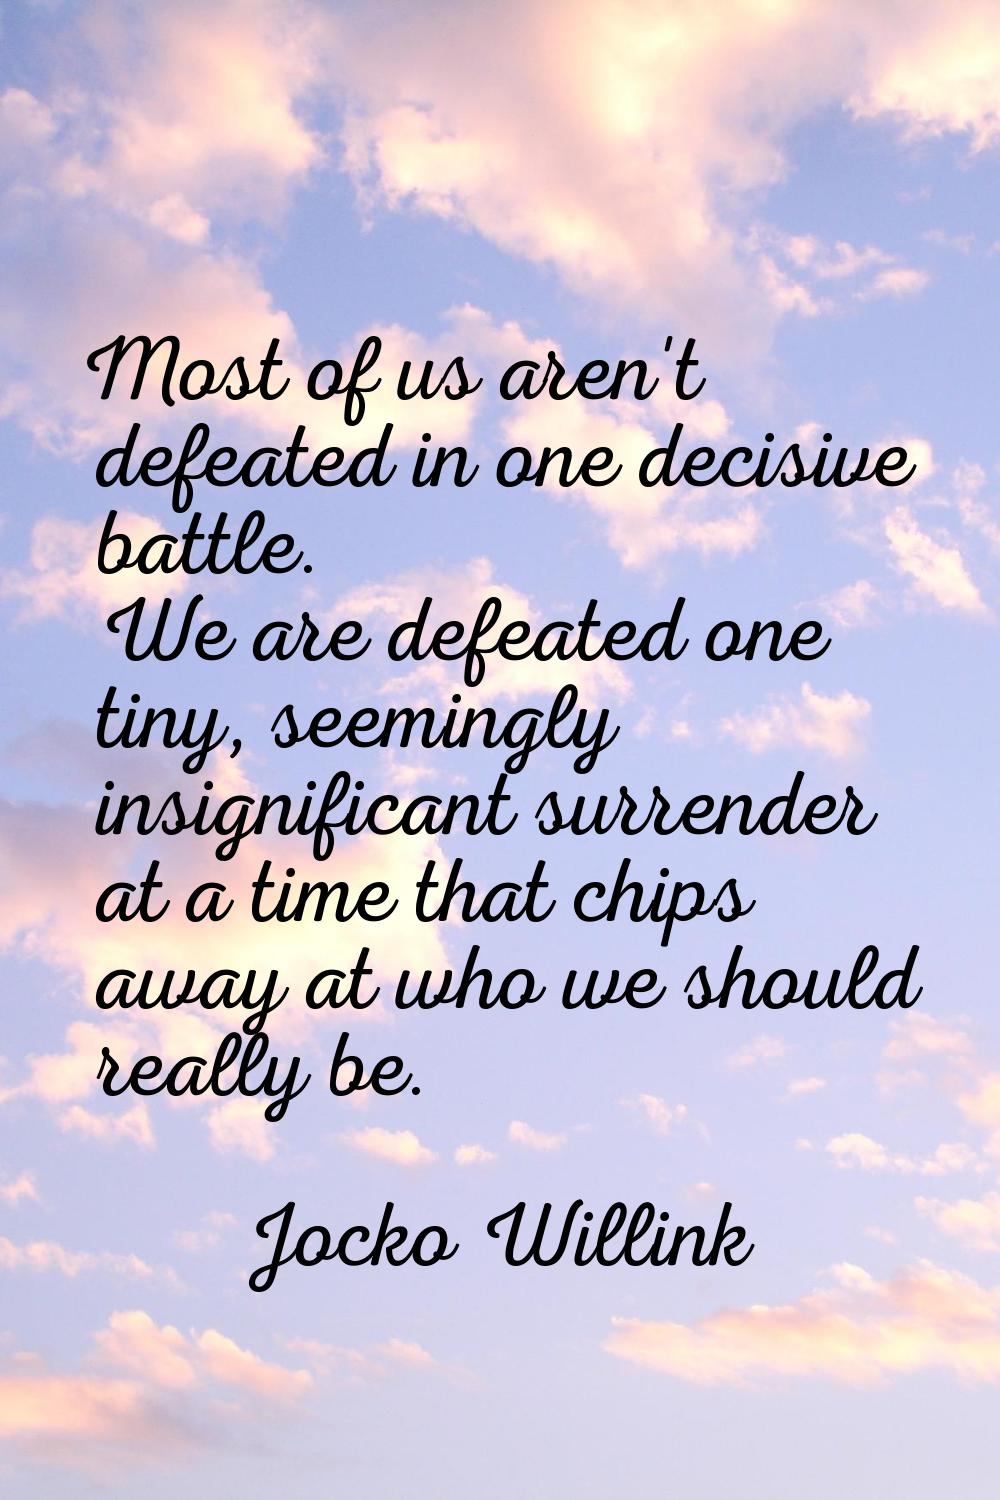 Most of us aren't defeated in one decisive battle. We are defeated one tiny, seemingly insignifican